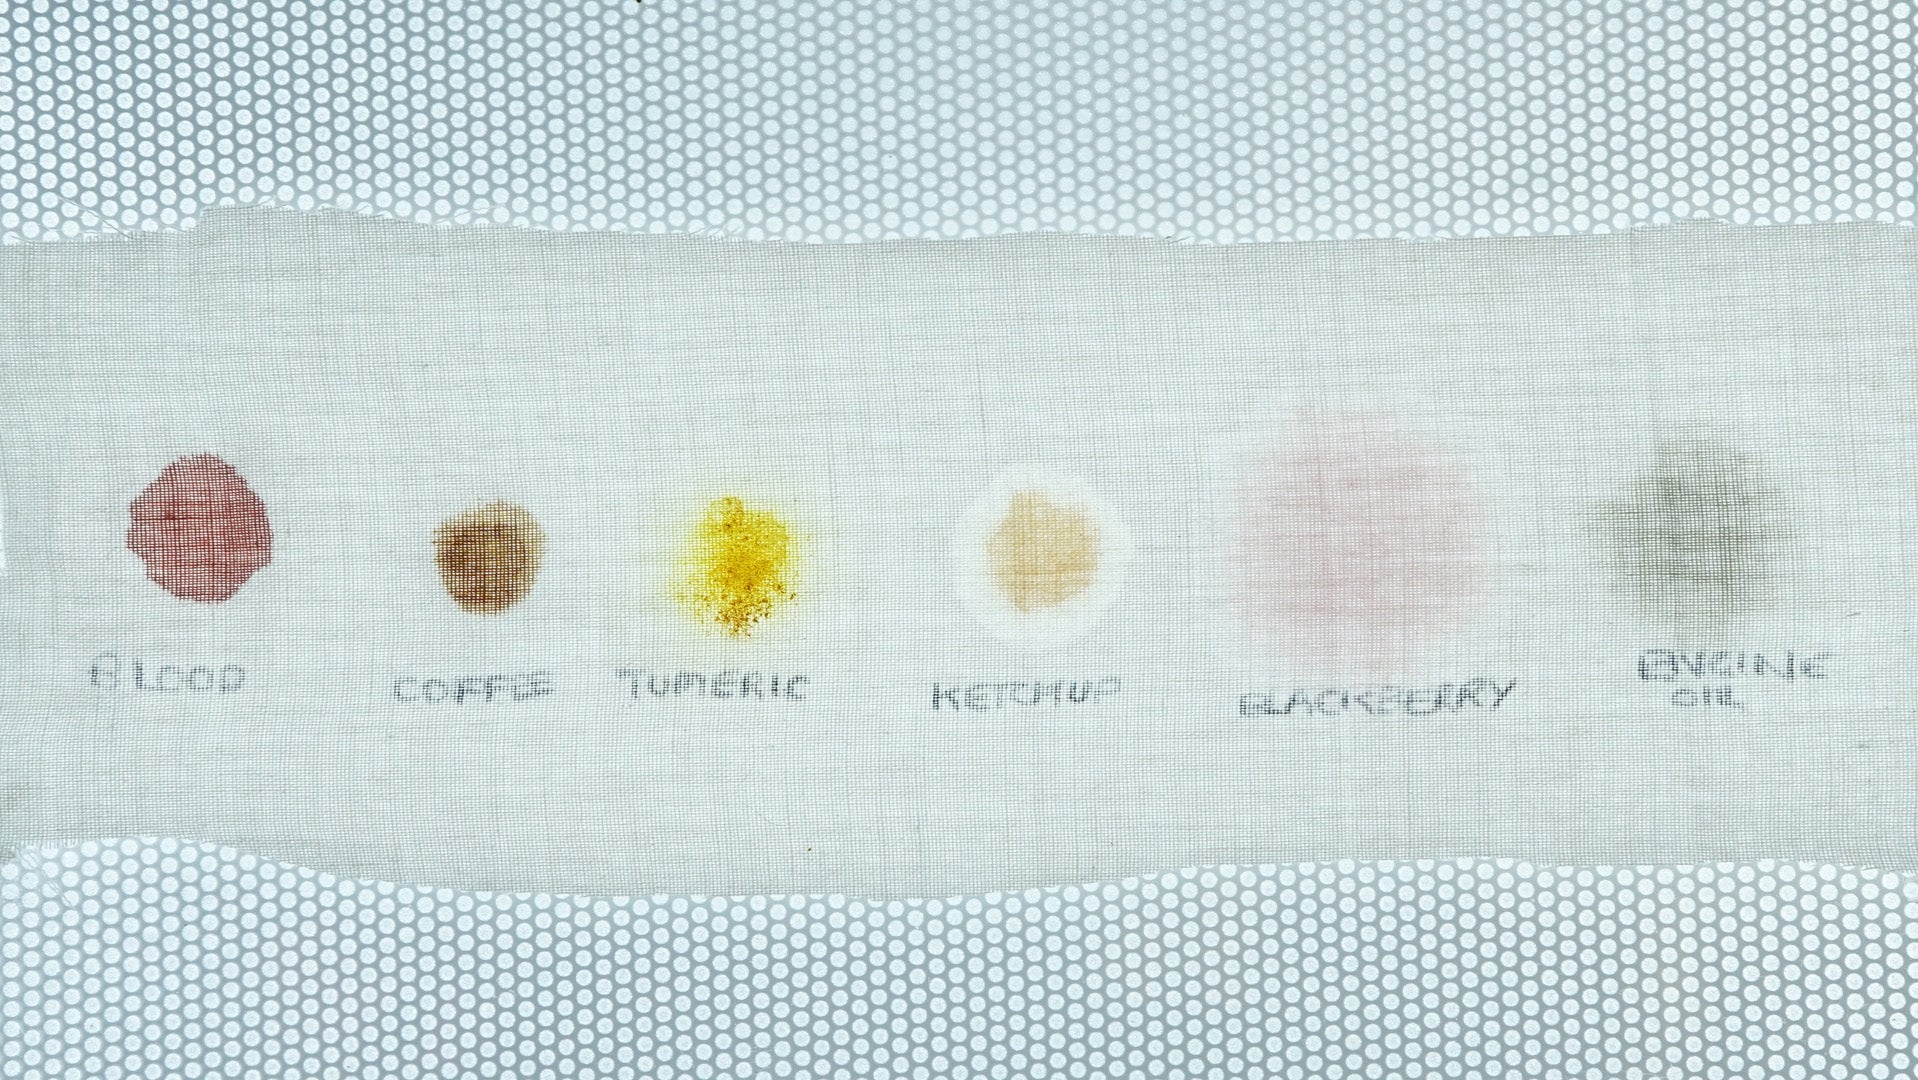 Stain removal test swatches with labels on fabric.